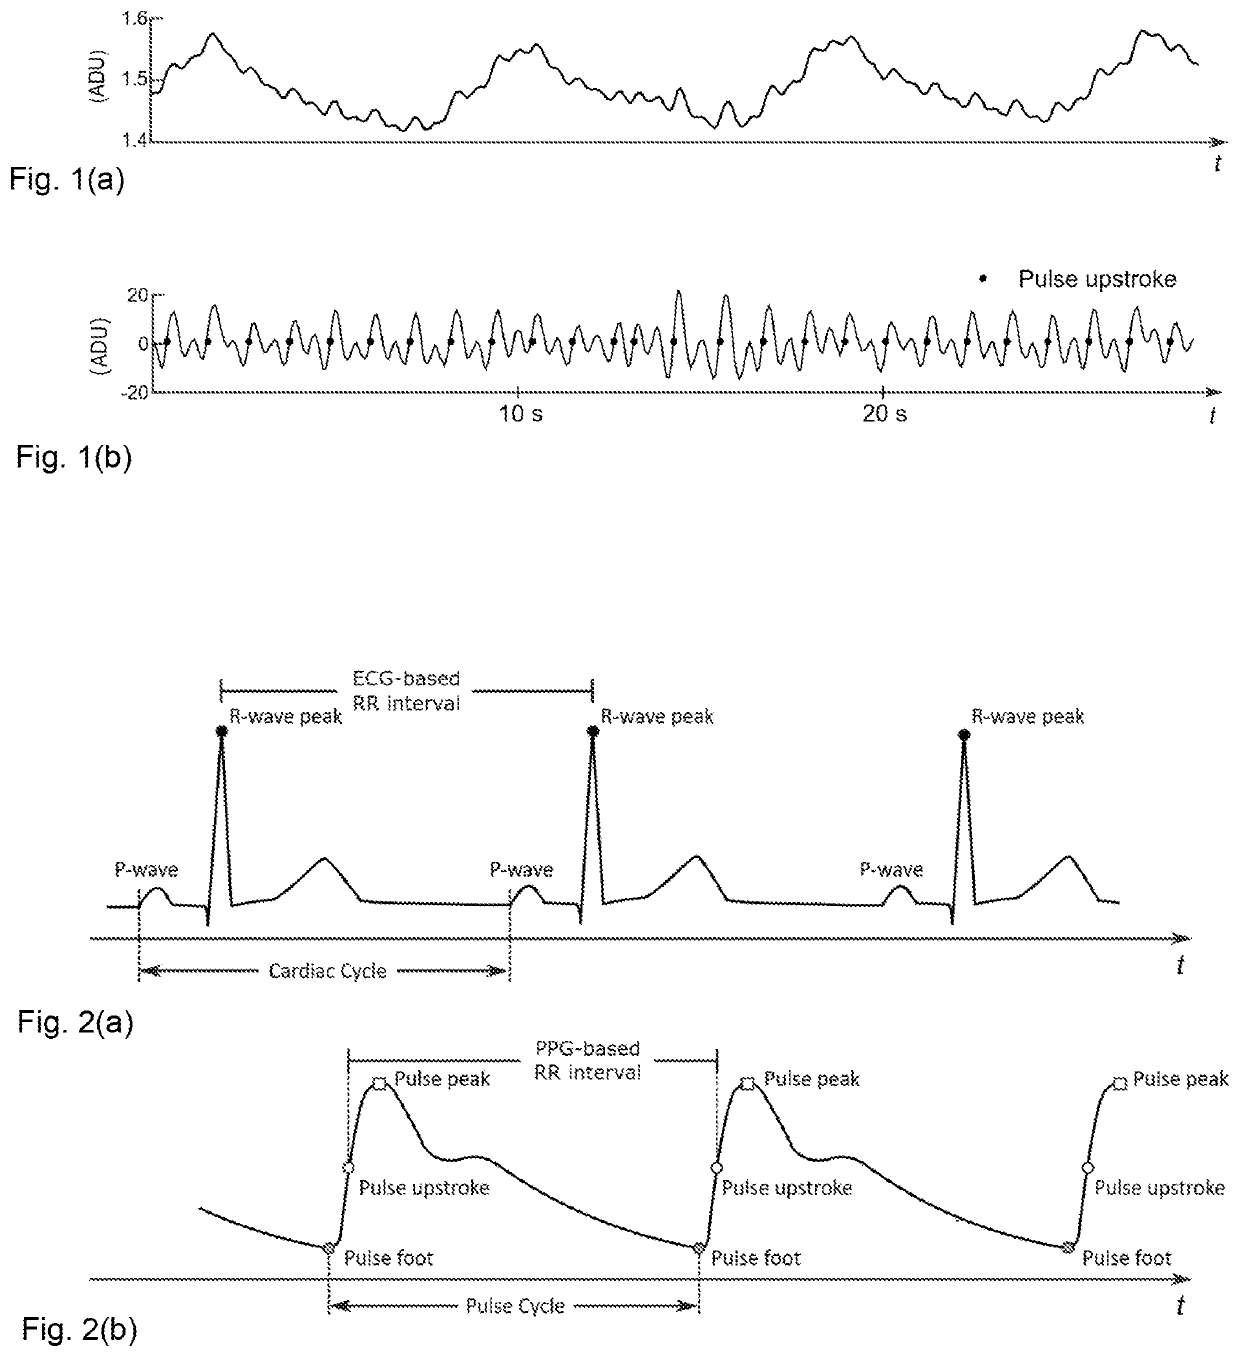 Method for classifying photoplethysmography pulses and monitoring of cardiac arrhythmias